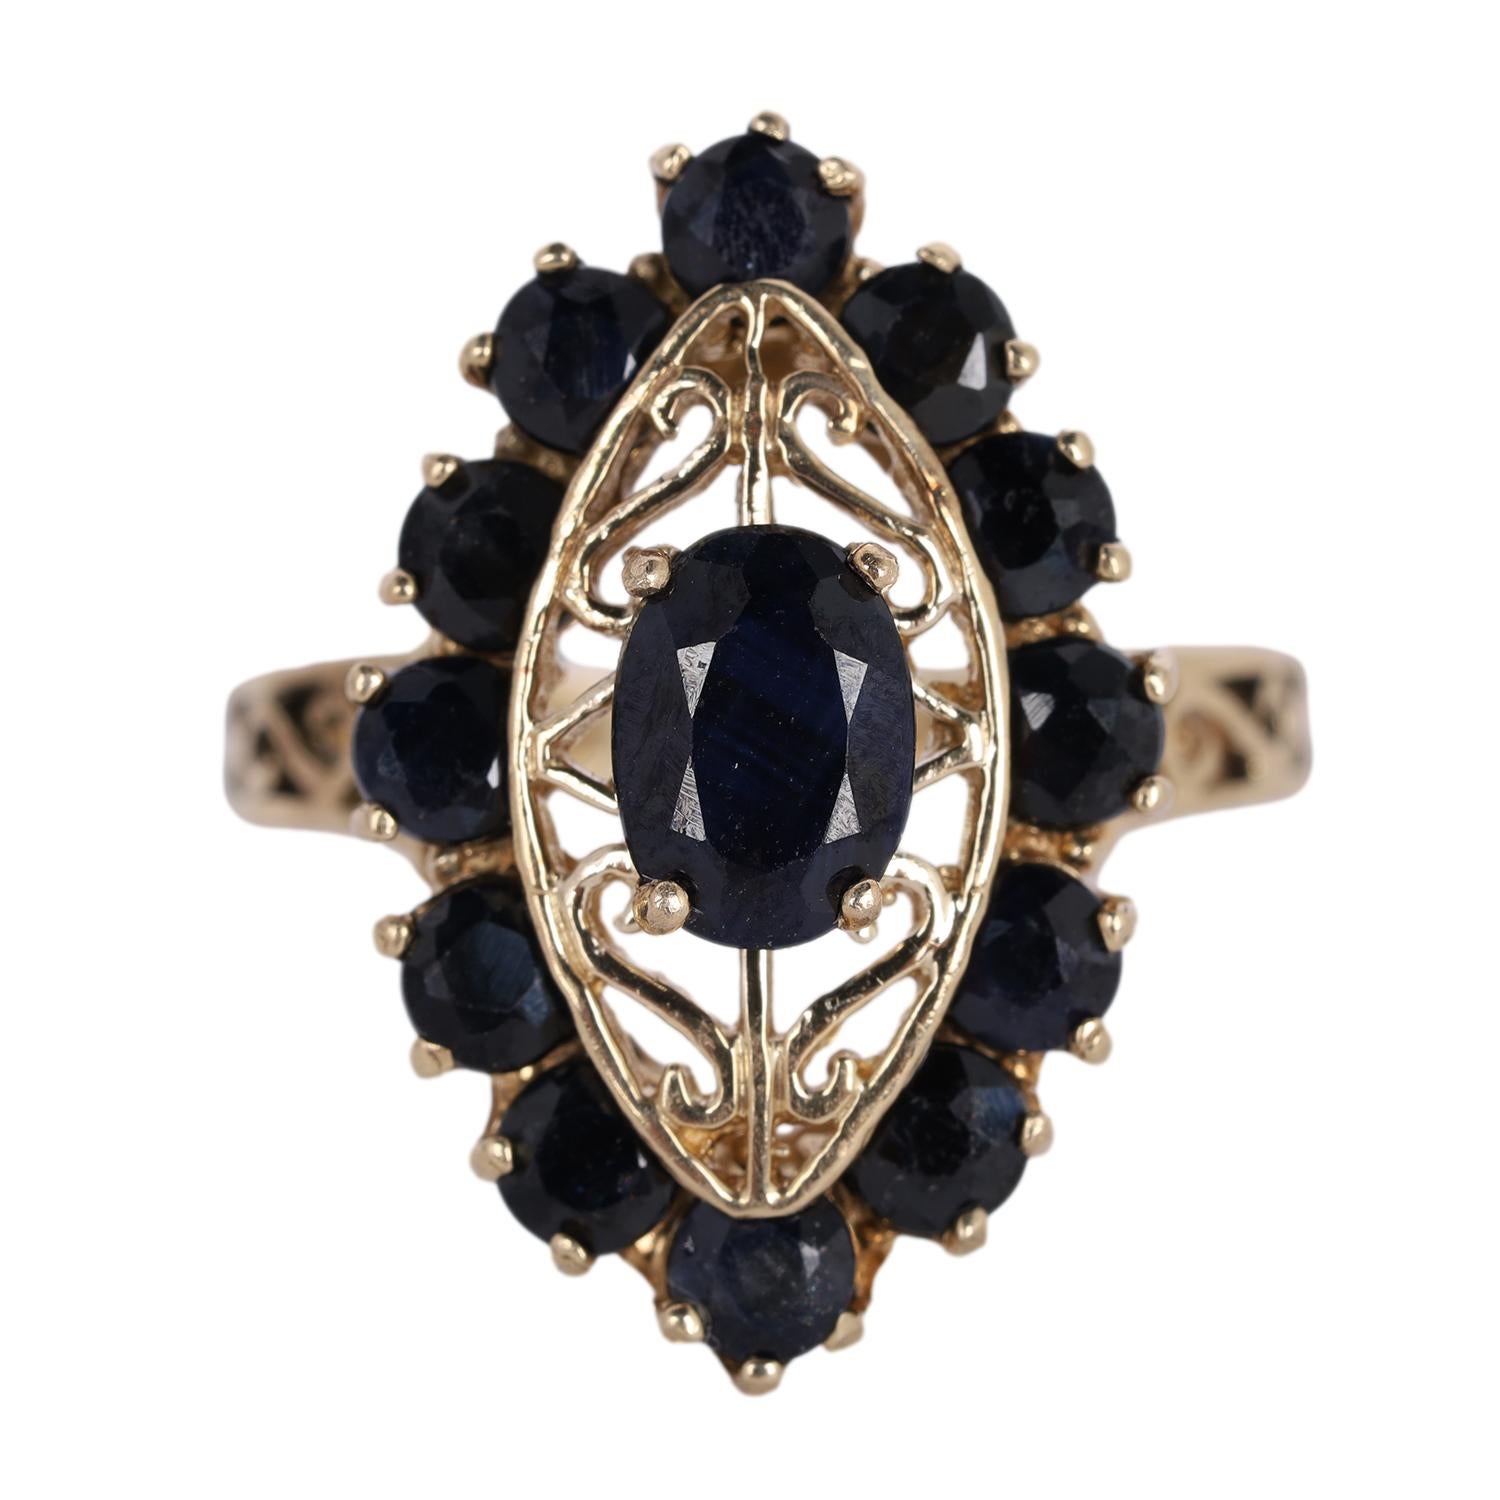 The ring features an oval cut and prong set sapphire as the center stone. It measures 7mm in length and 5.02mm in width. Surrounding it in a marquise shaped main setting are 12 additional round cut and prong set sapphires, each measuring